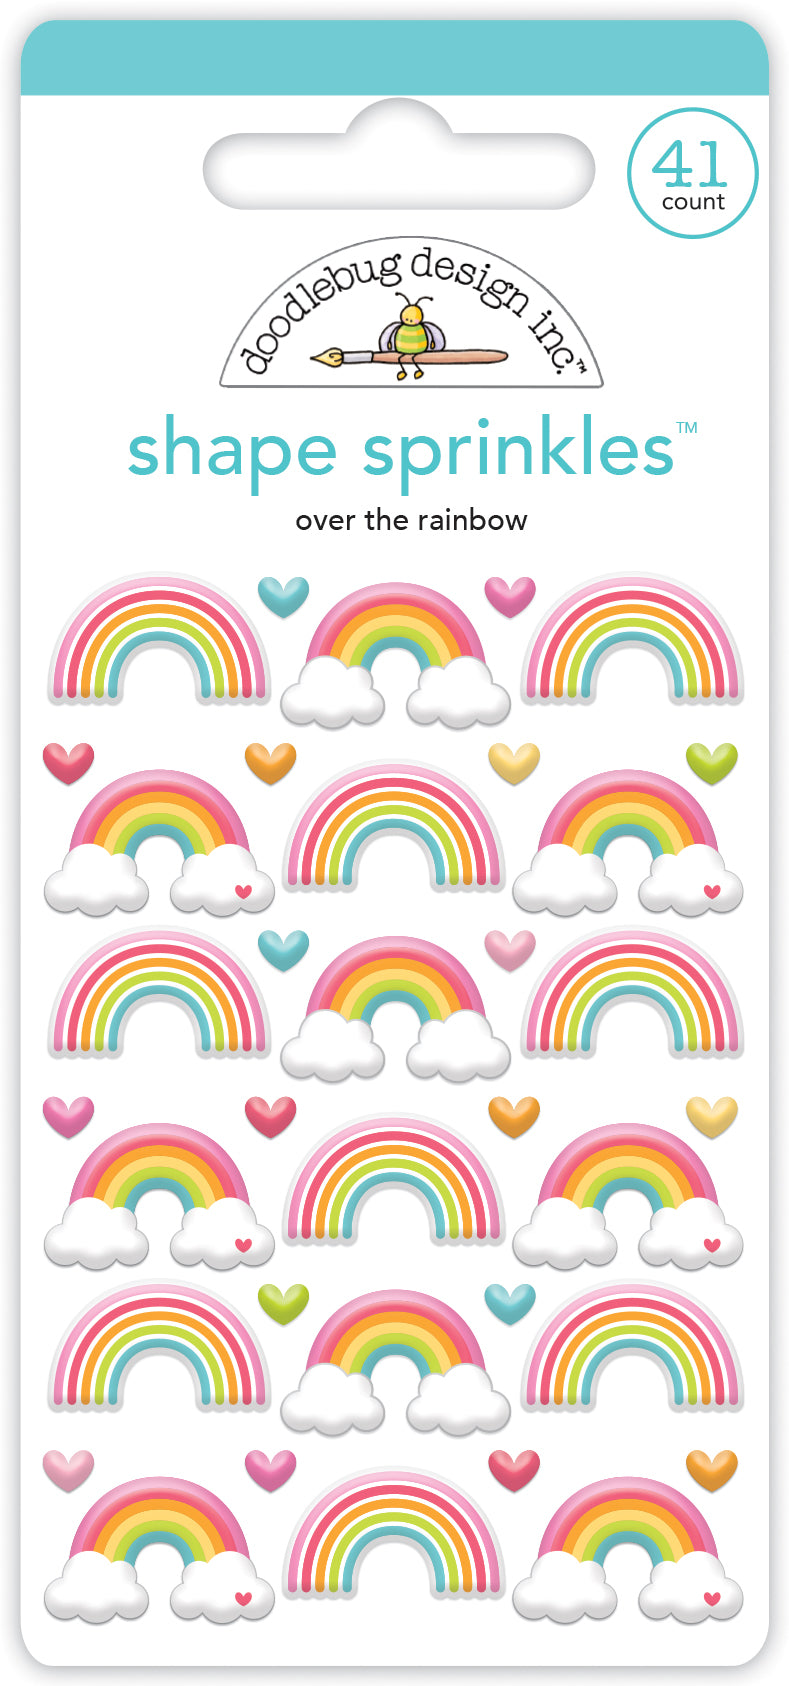 Over the Rainbow Sprinkles Stickers